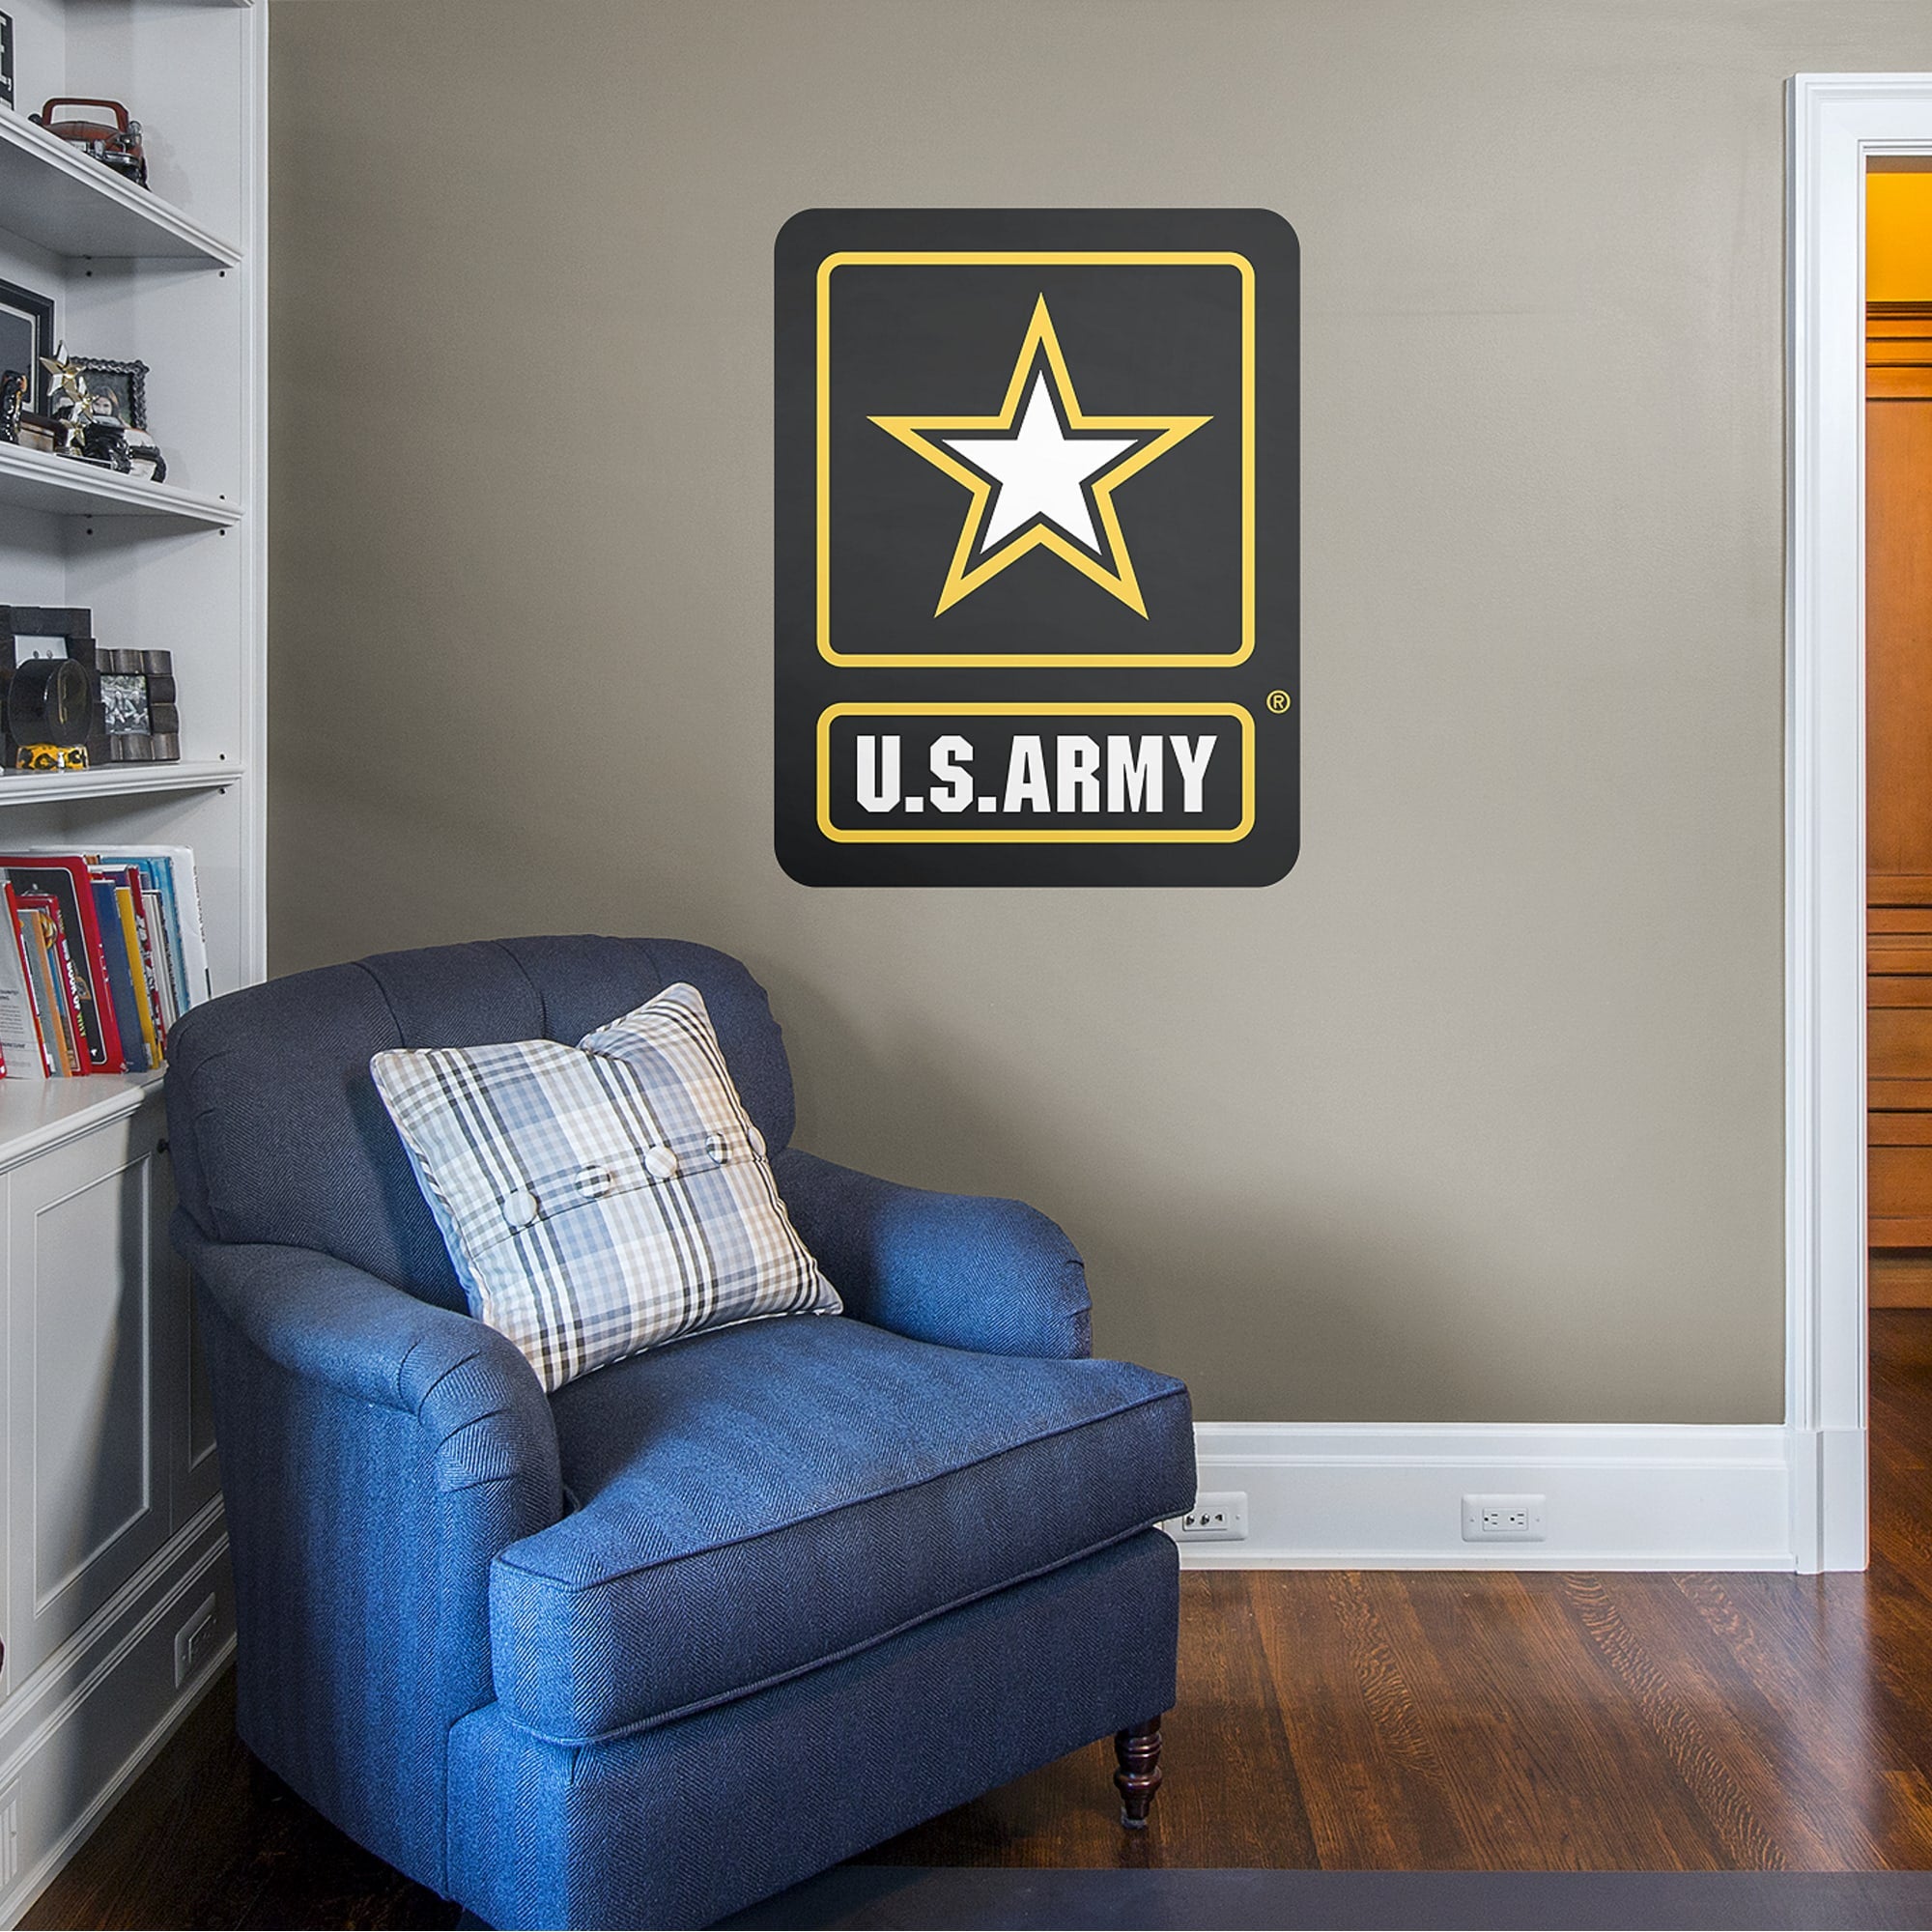 United States Army: Logo - Officially Licensed Removable Wall Decal 30.0"W x 39.0"H by Fathead | Vinyl